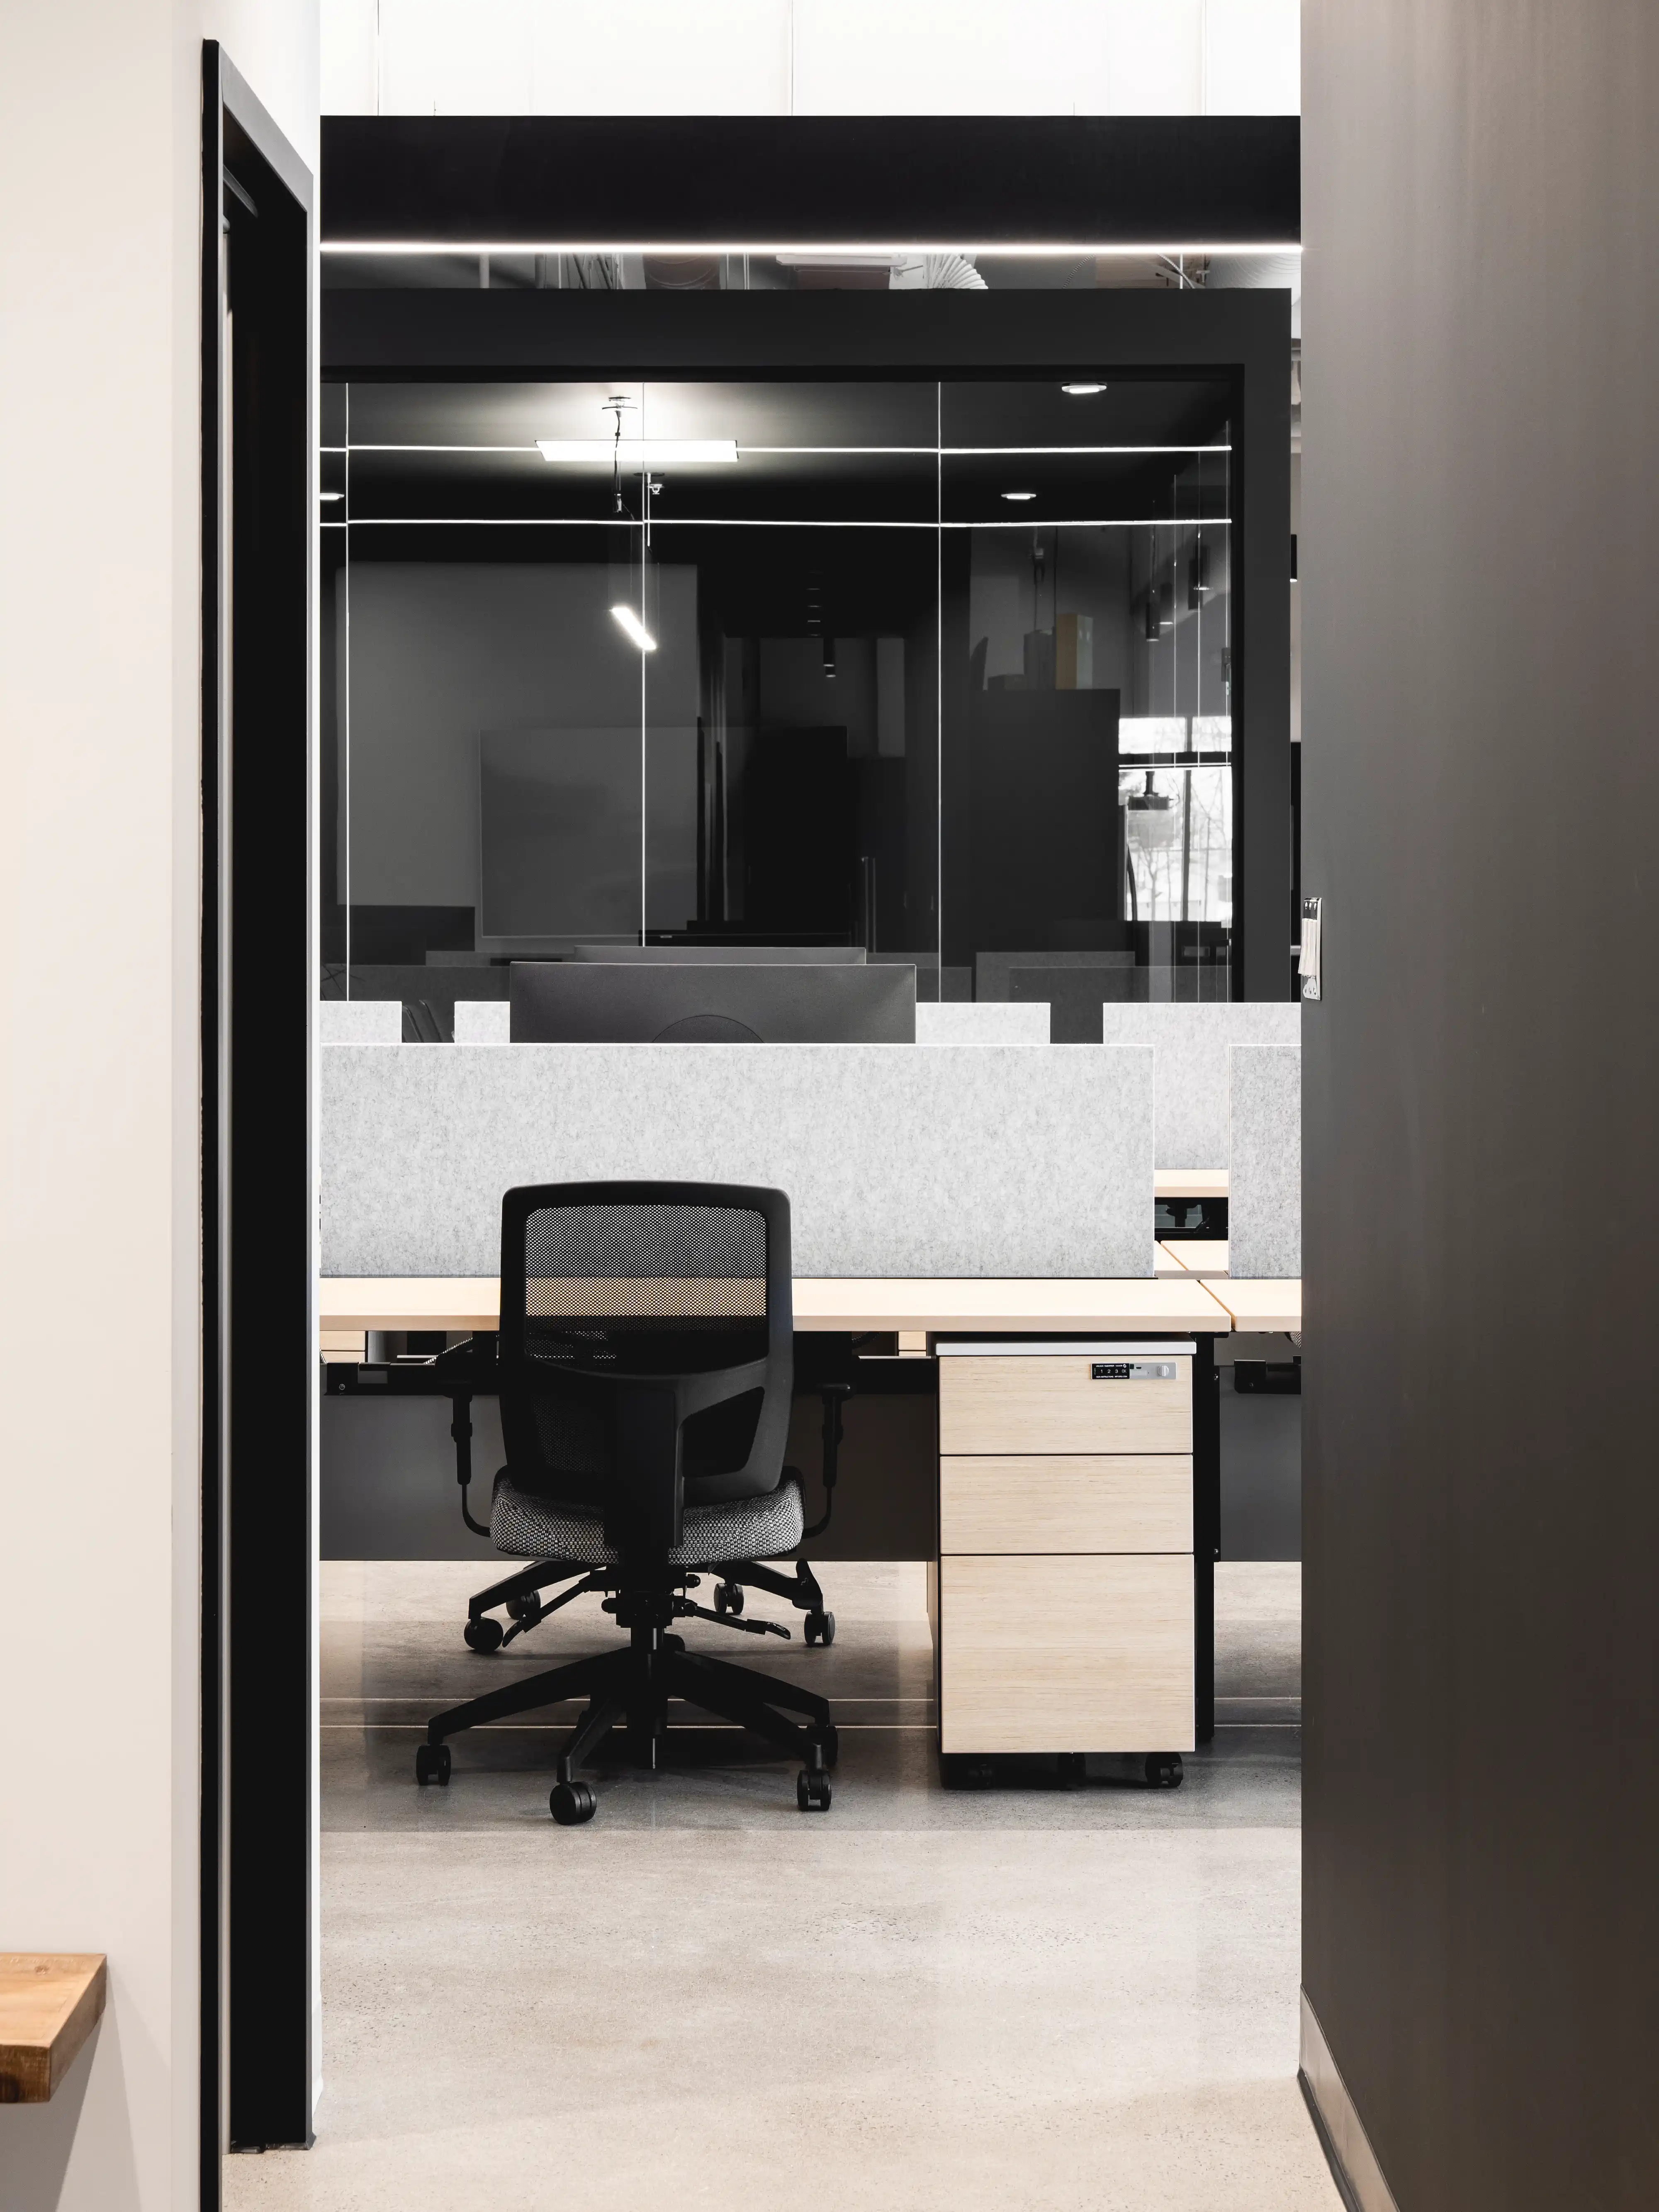 A modern office space with cubicles and a black office chair in front of a wooden desk, interior by Sarah Brown Design